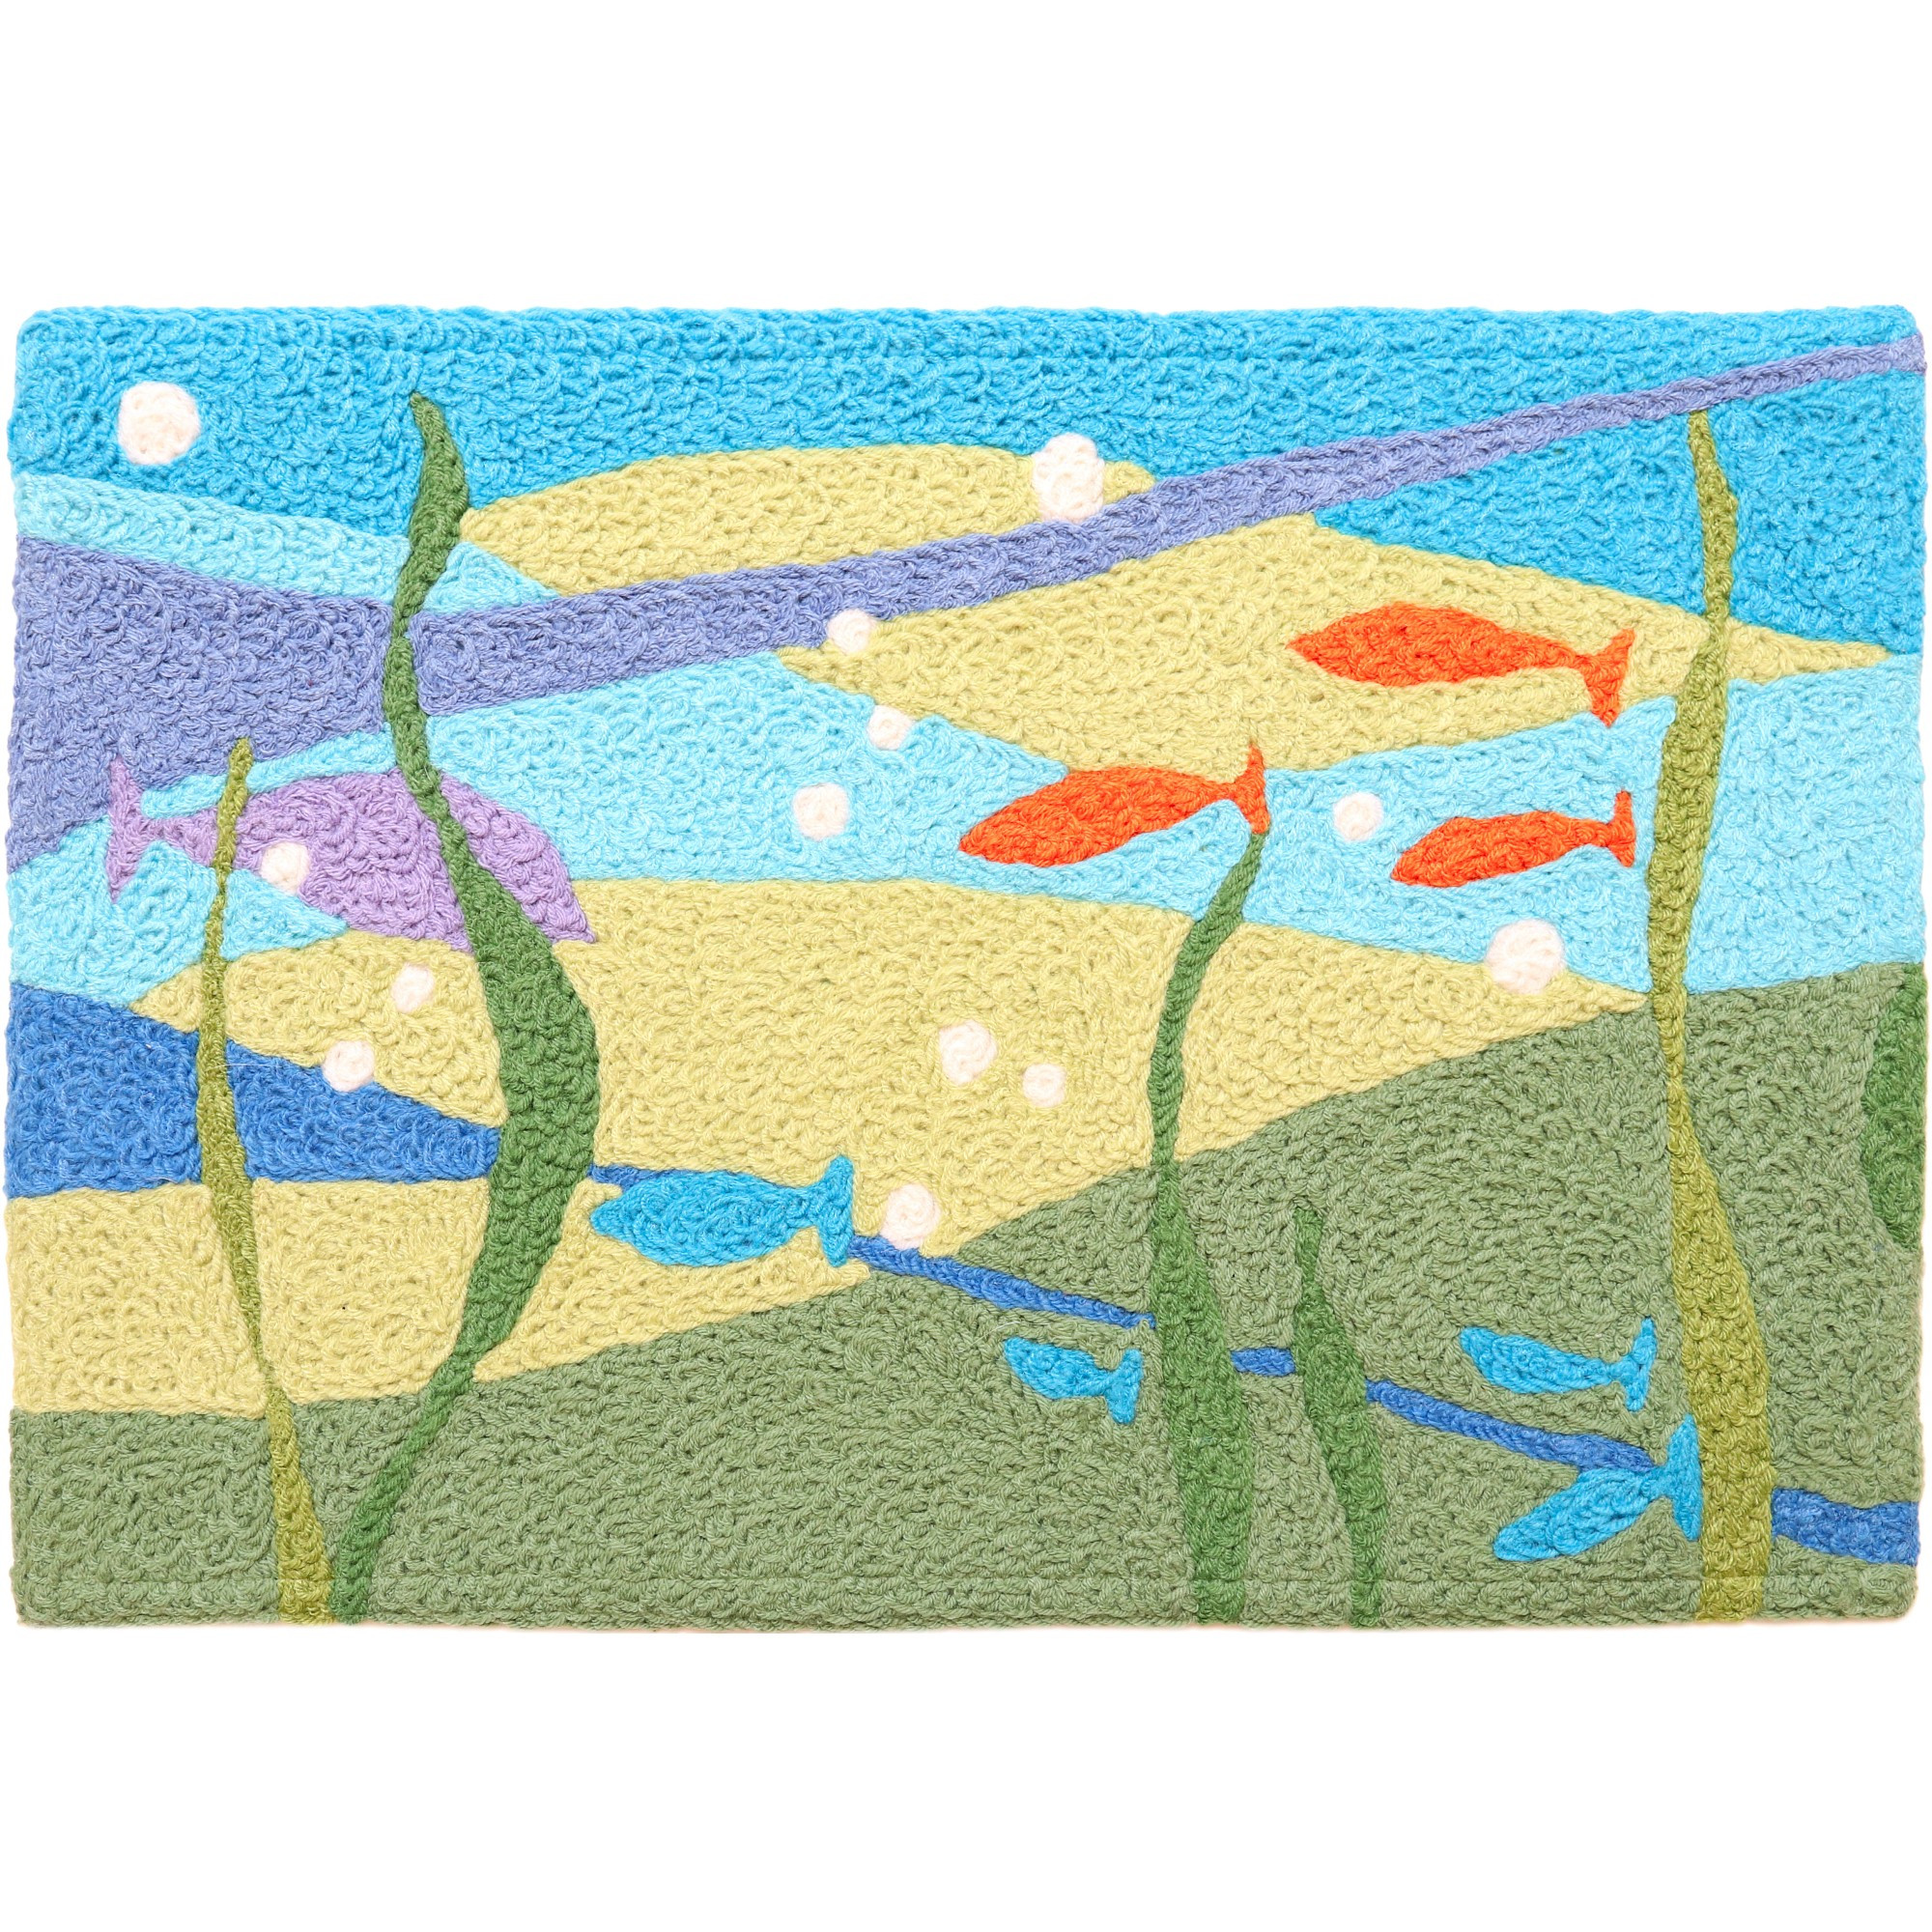 Jellybean All The Little Fishes 20"x30" Washable Accent Rug